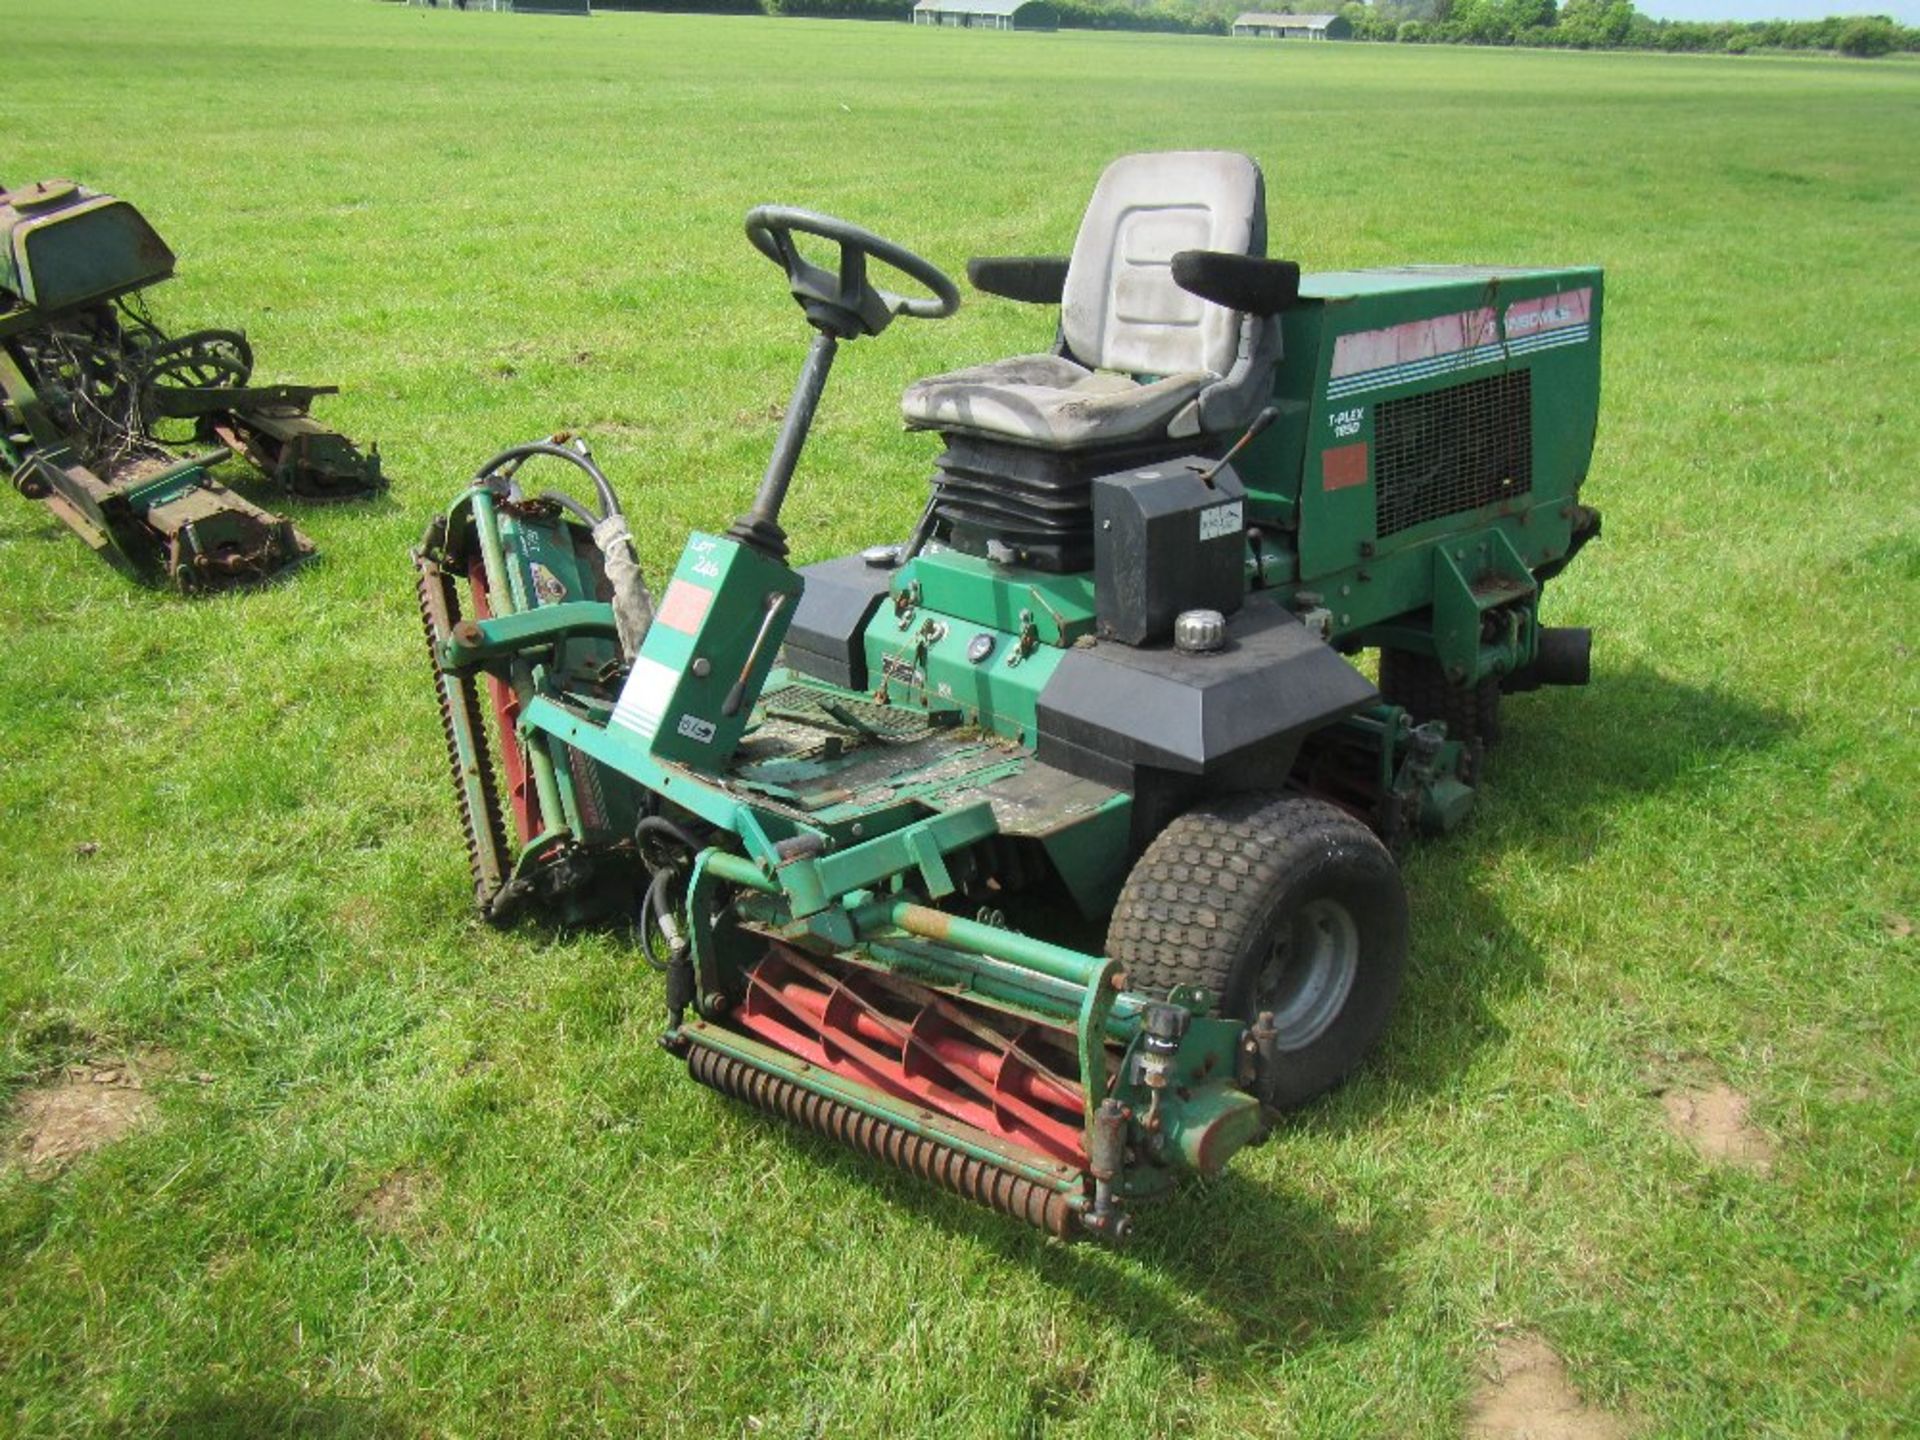 Ransomes triple cylinder mower